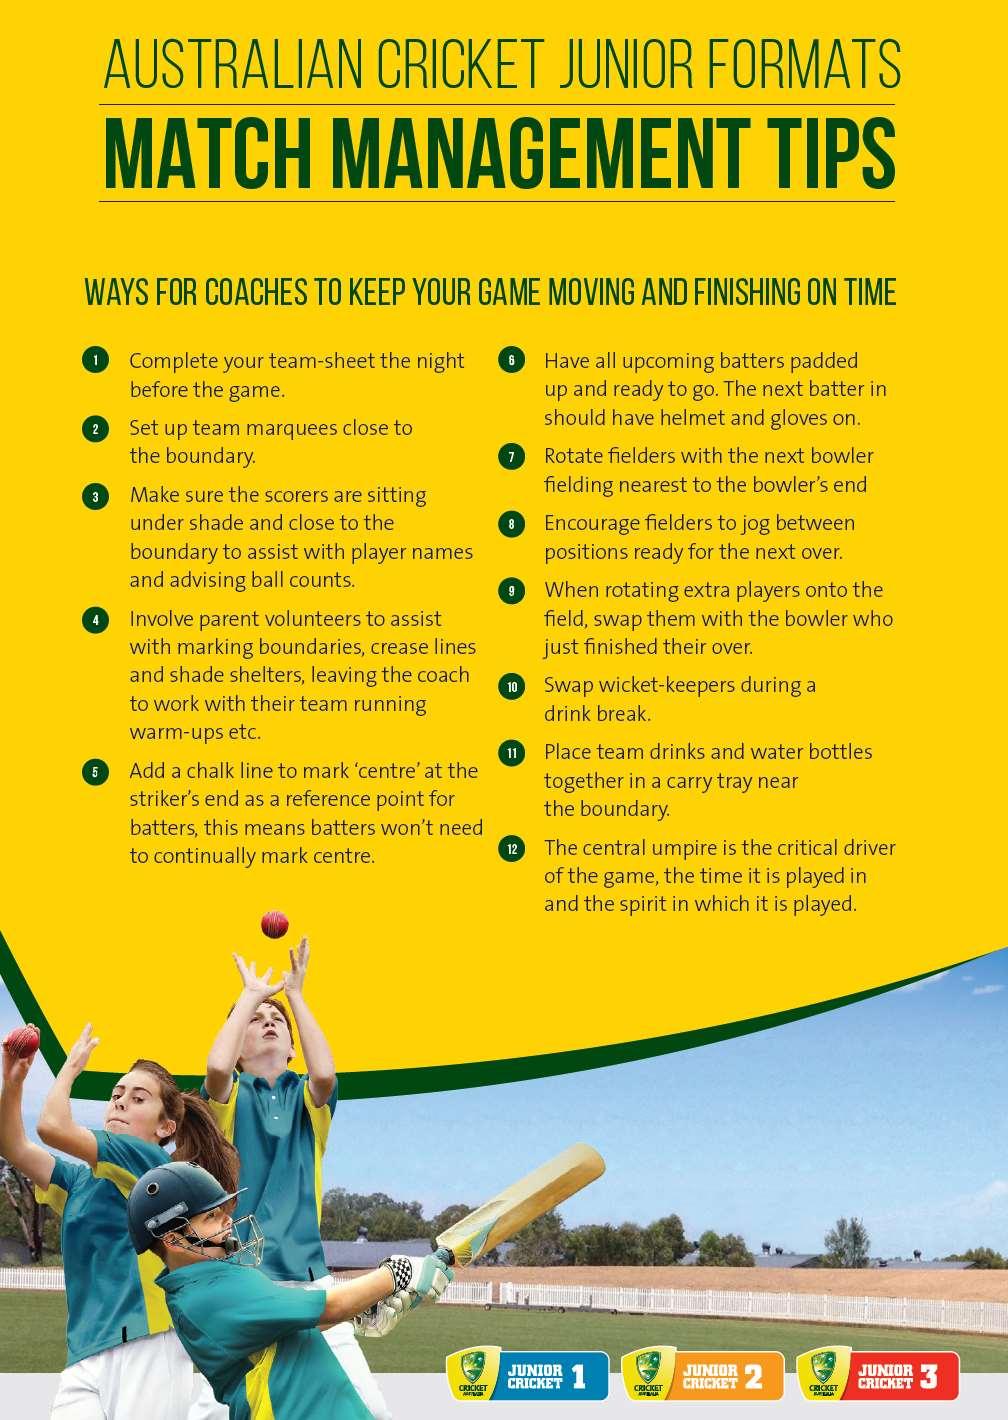 MATCH MANAGEMENT TIPS Ways for coaches to keep your game moving and finishing on time.